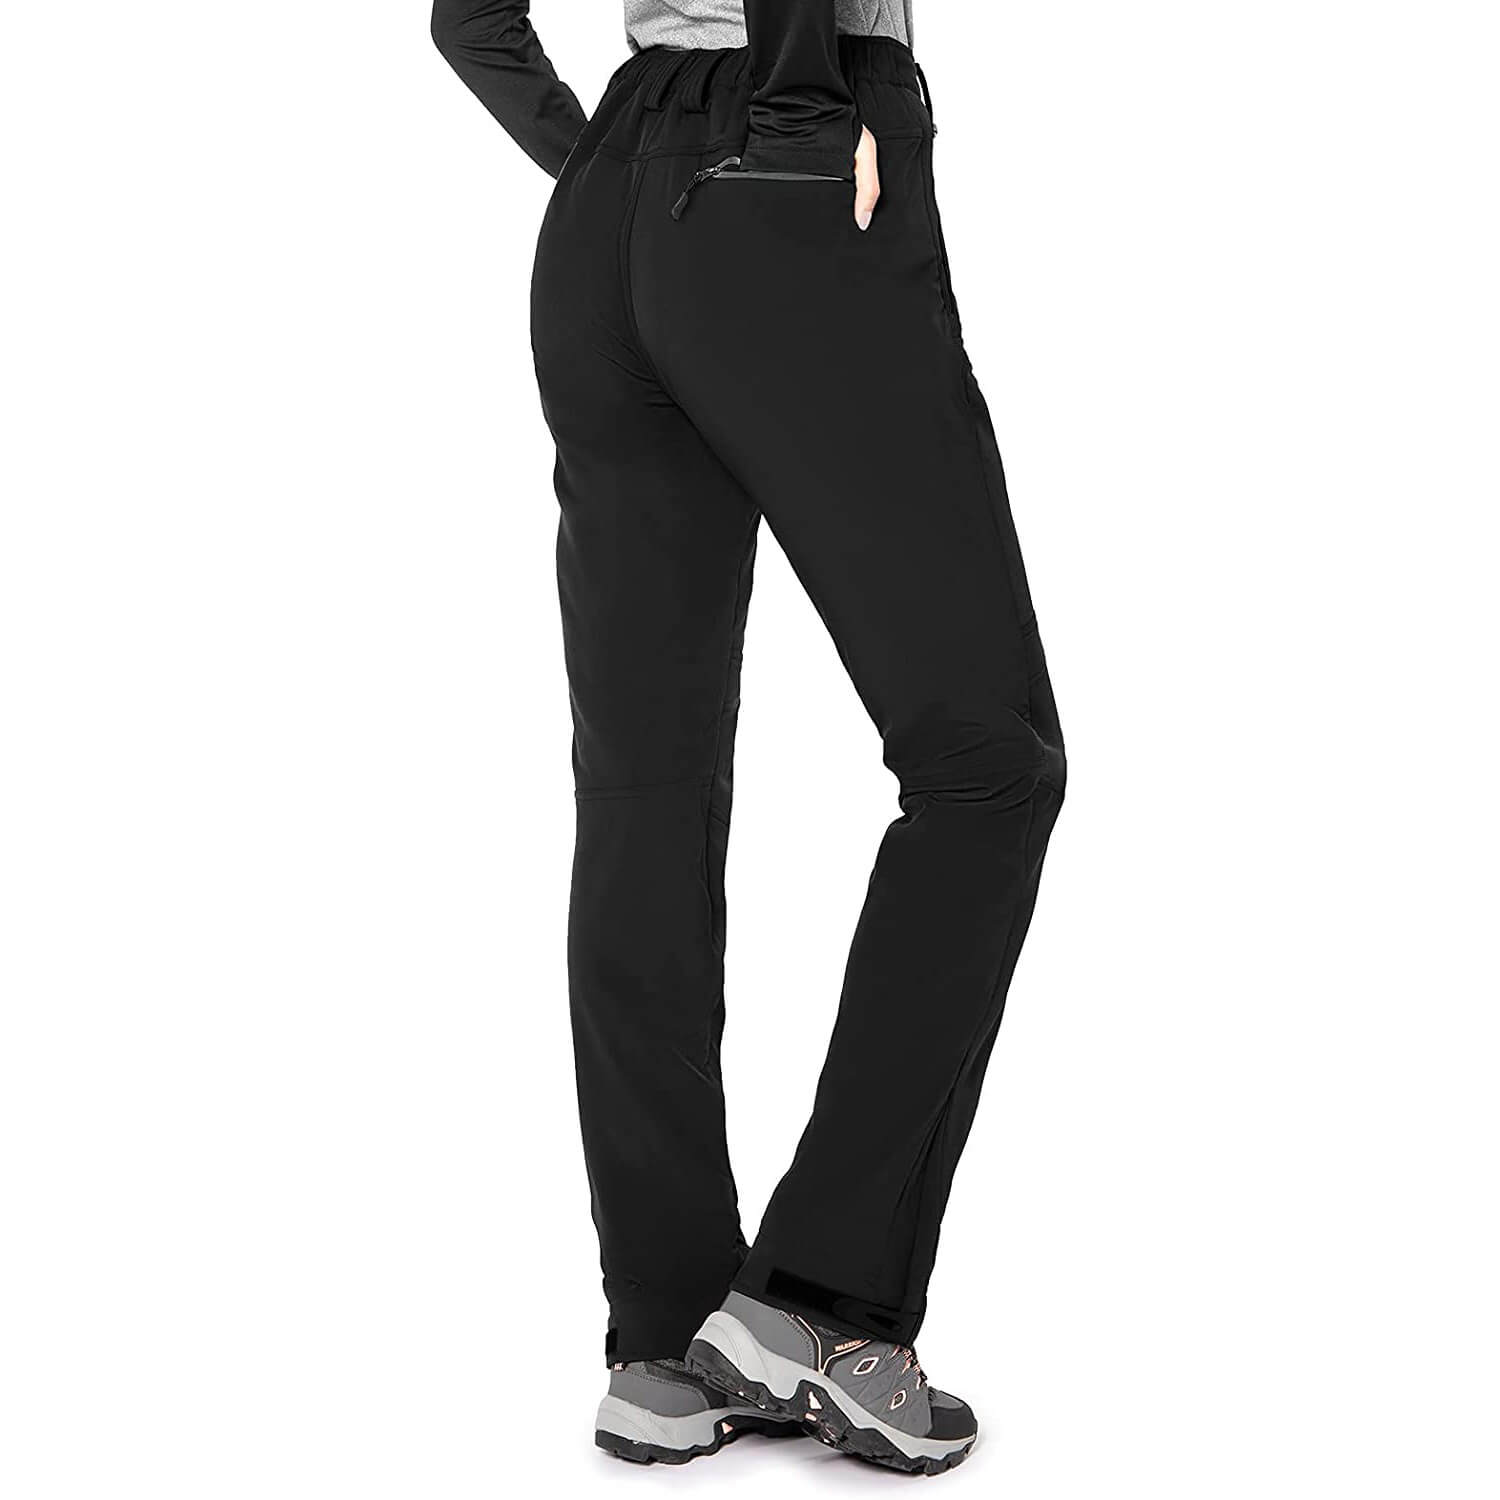 BOWCS Women's Hiking Cargo Pants - Outdoor Athletic Pants